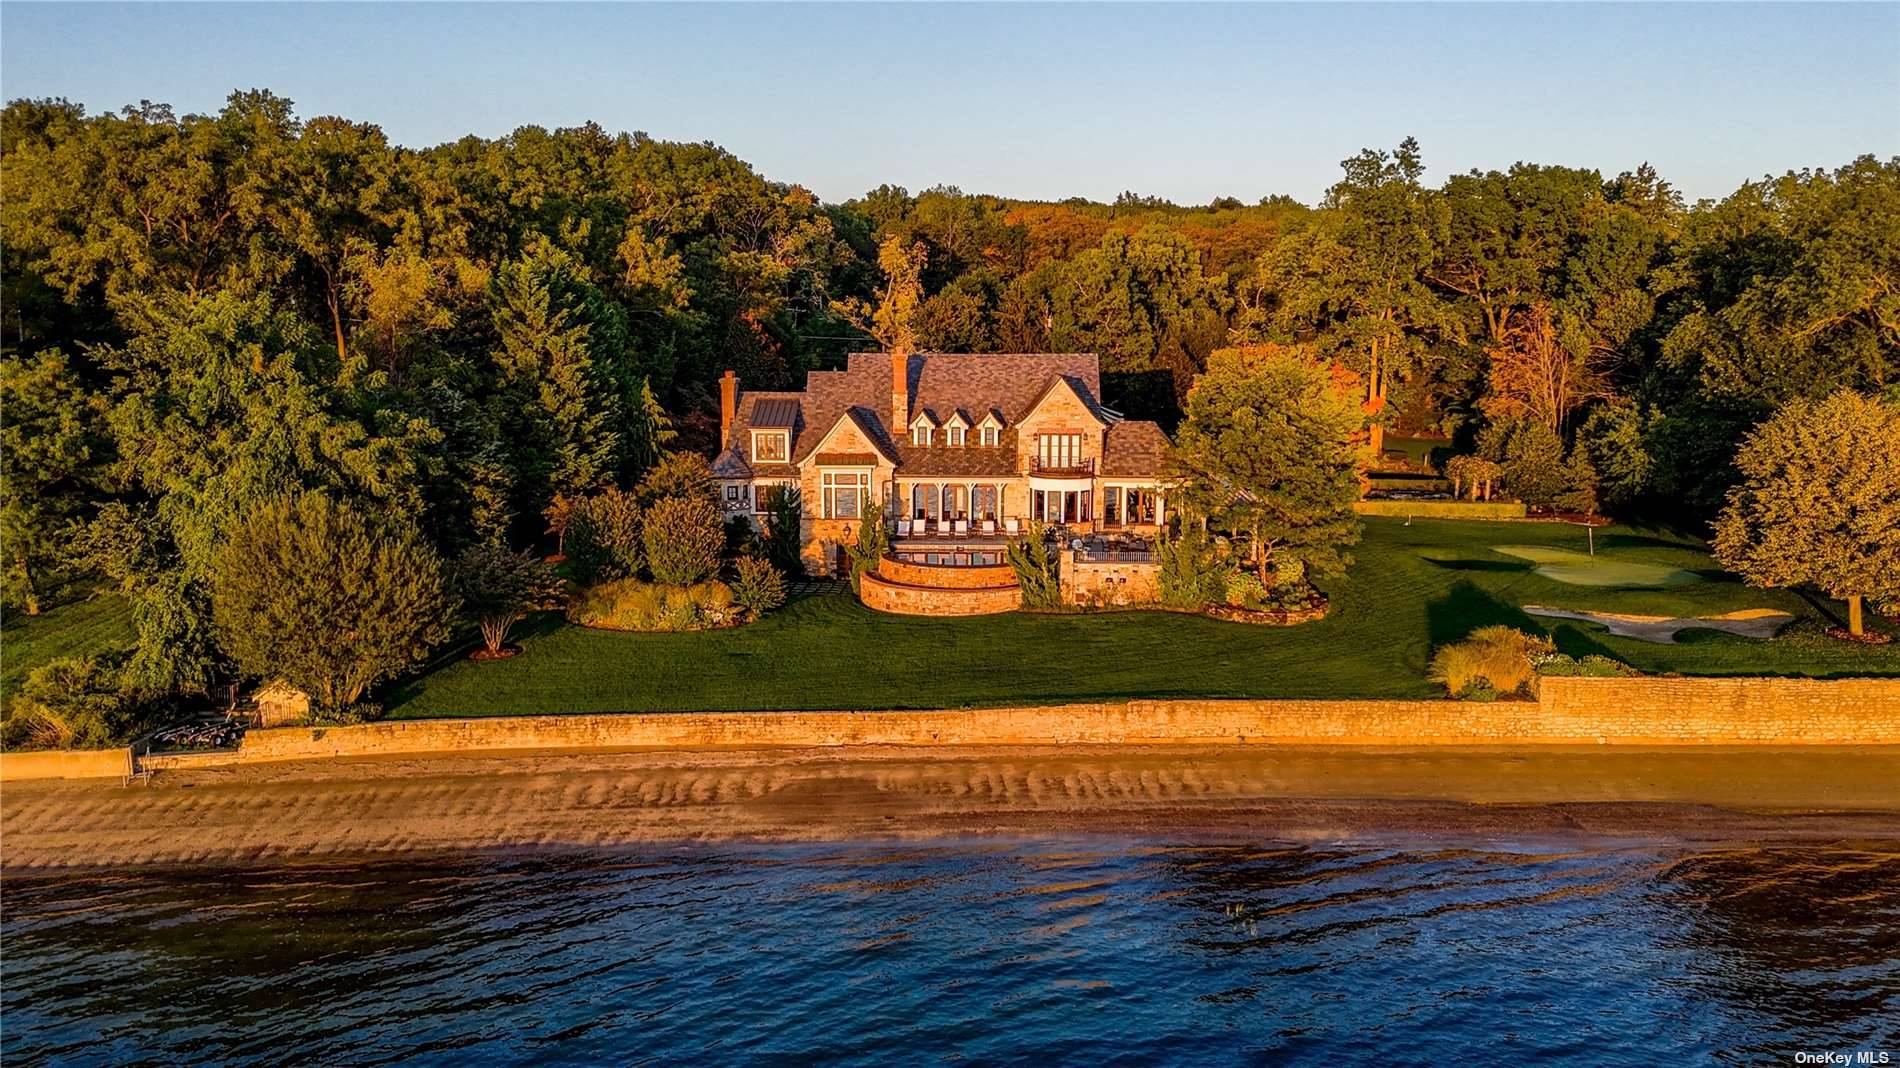 Overlooking picturesque Oyster Bay Harbor, this stately waterfront Manor home is located on 1.